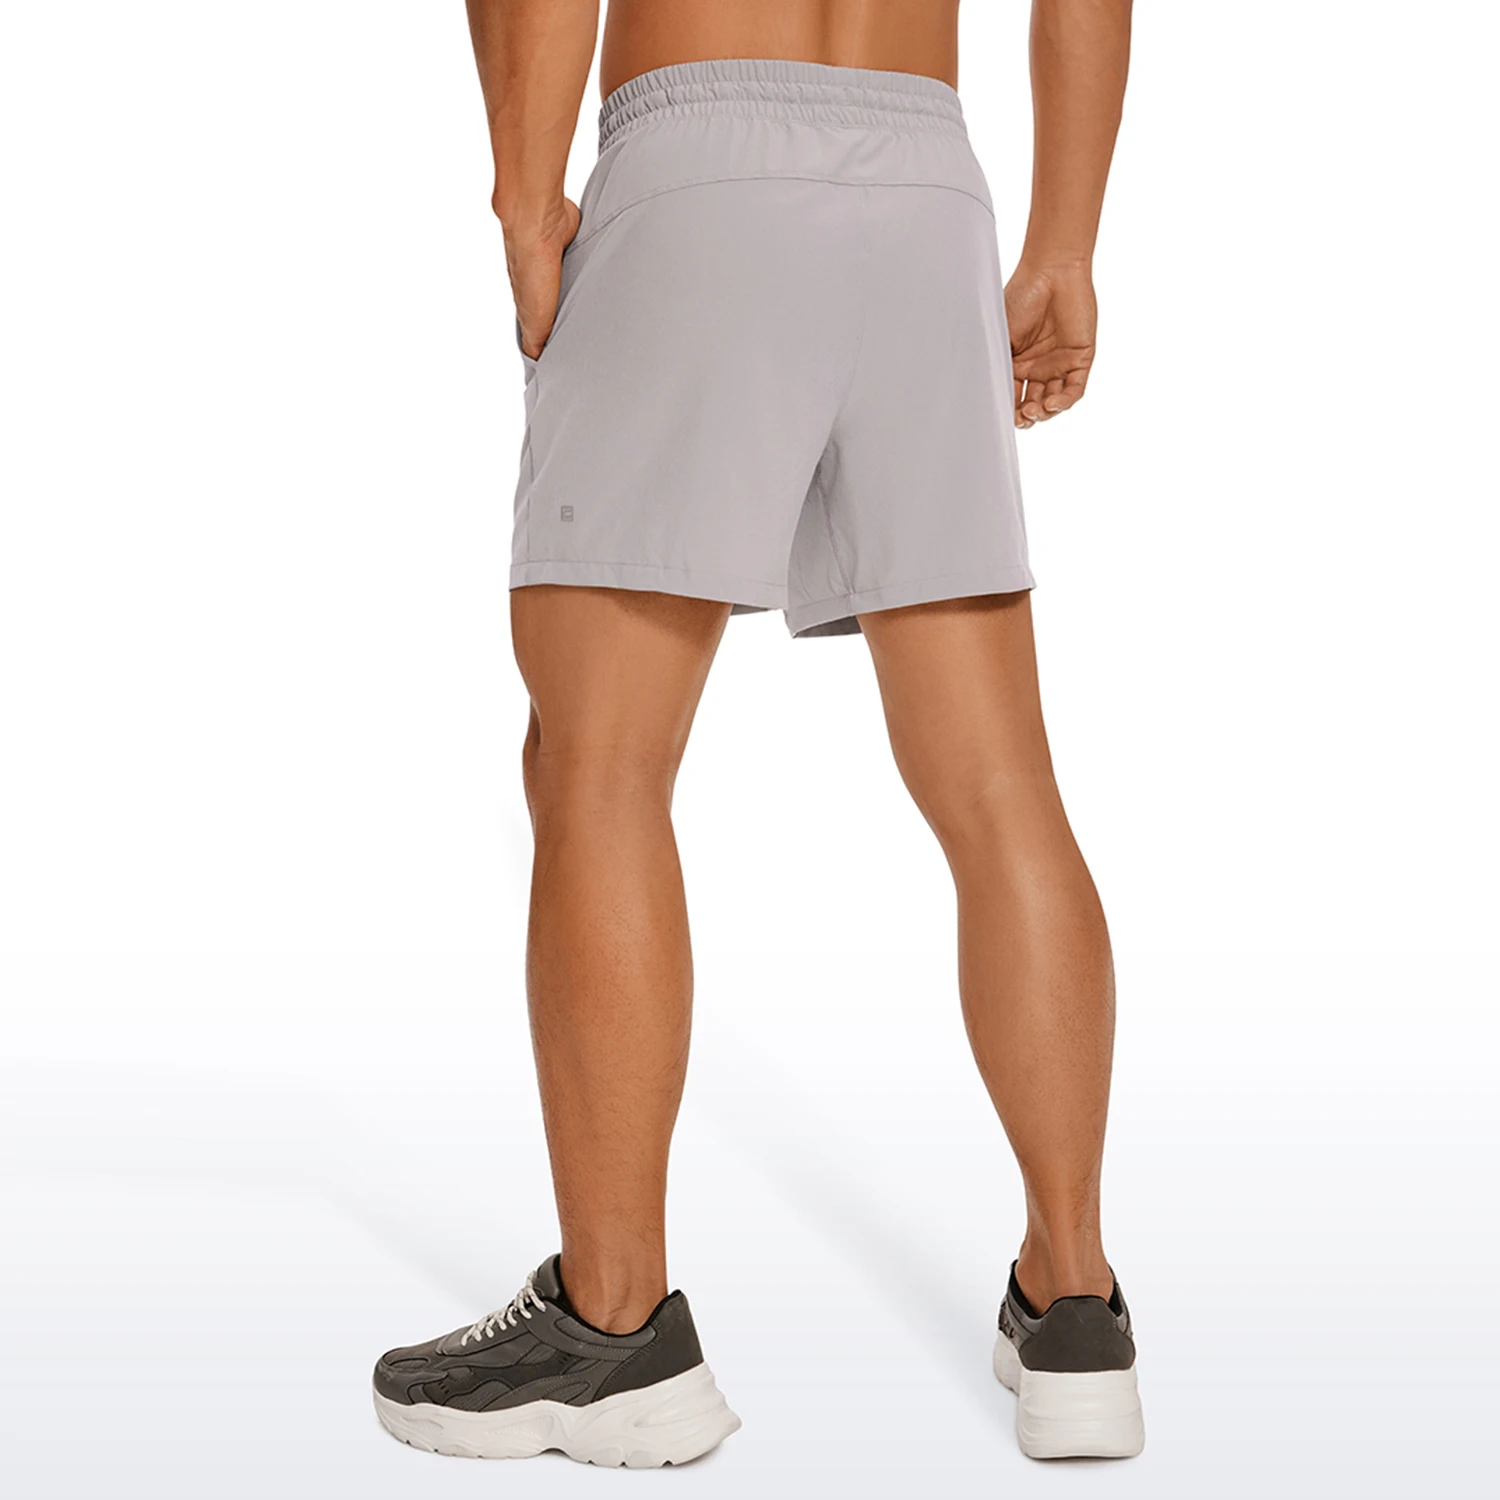 CRZ YOGA Men's Linerless Workout Shorts - 5'' Lightweight Quick Dry Running Sports Athletic Gym Shorts with Pockets